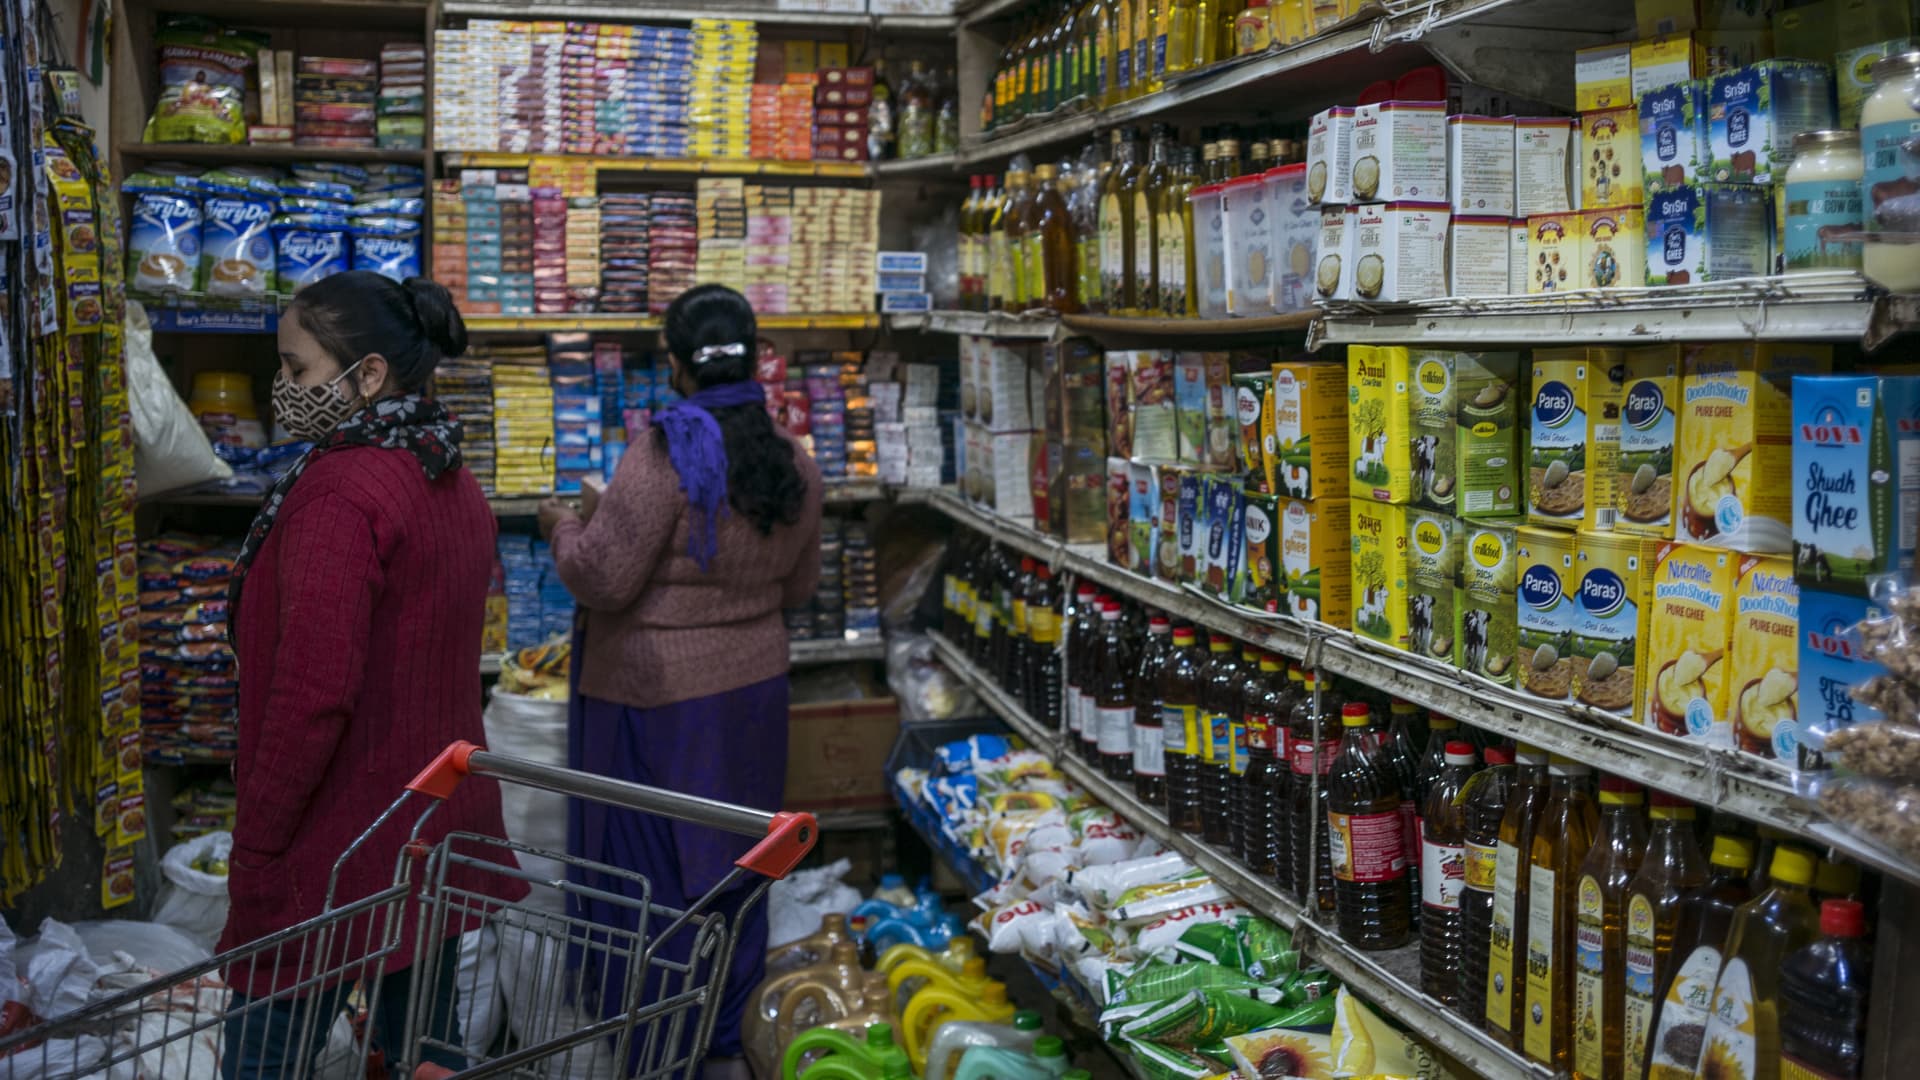 India’s central bank pivots focus from growth to fighting inflation as prices rise – CNBC